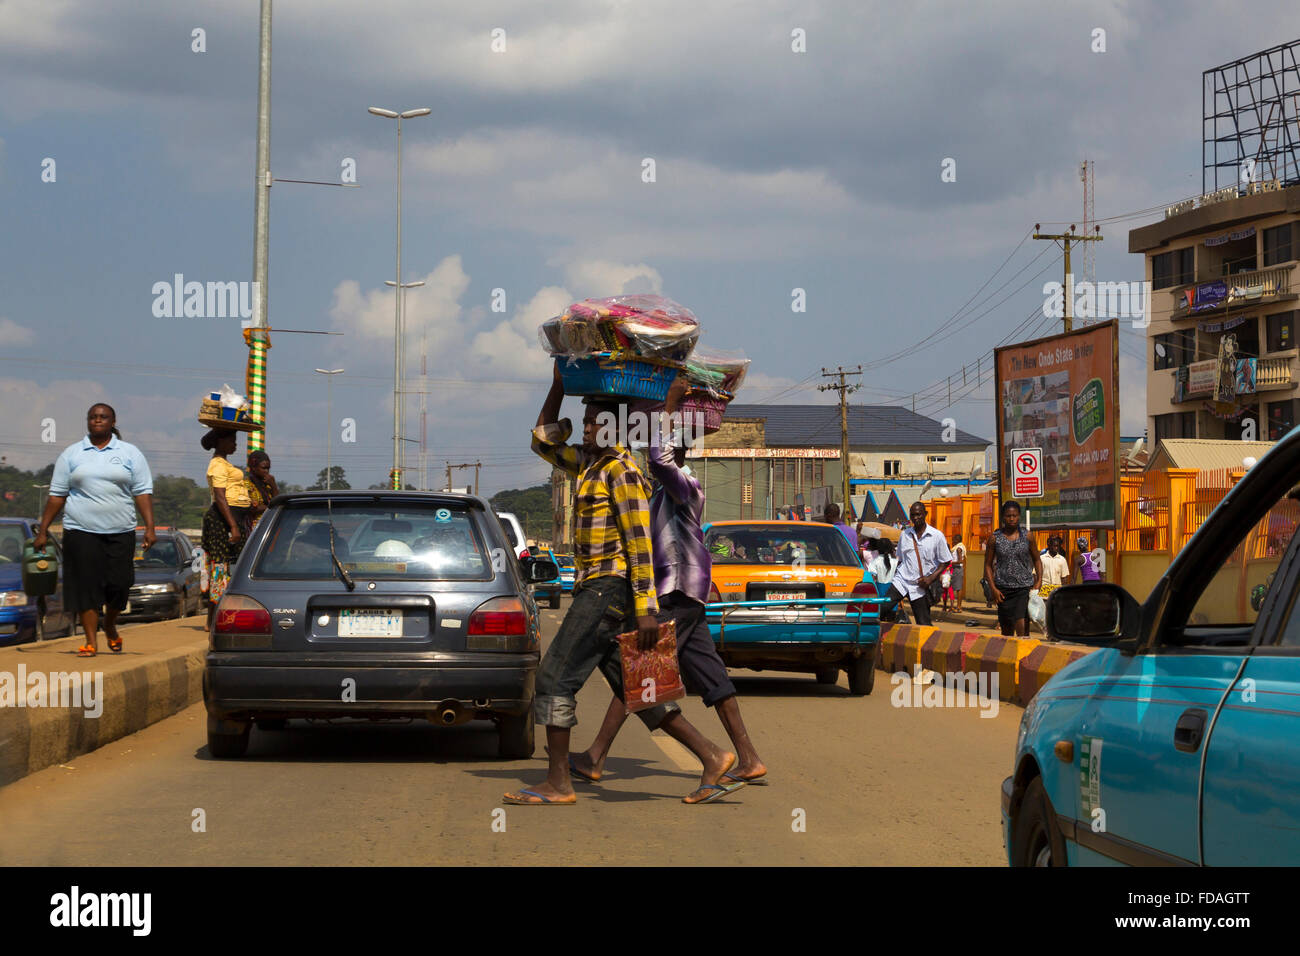 Urban scene in Lagos, with many people trading, carrying goods over their head Stock Photo